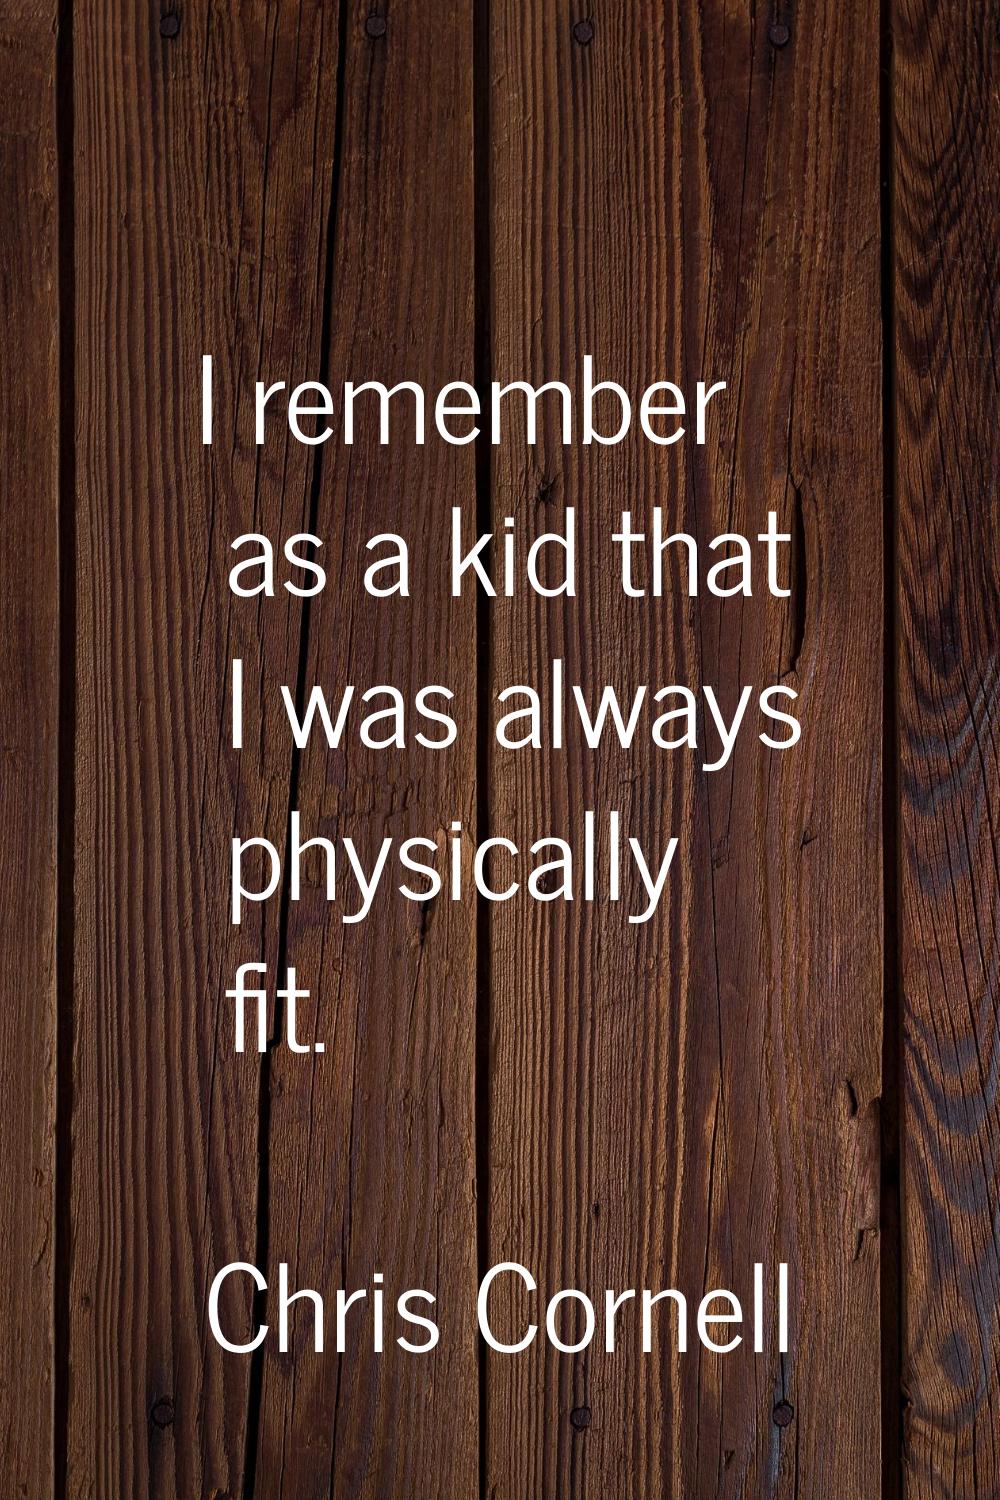 I remember as a kid that I was always physically fit.